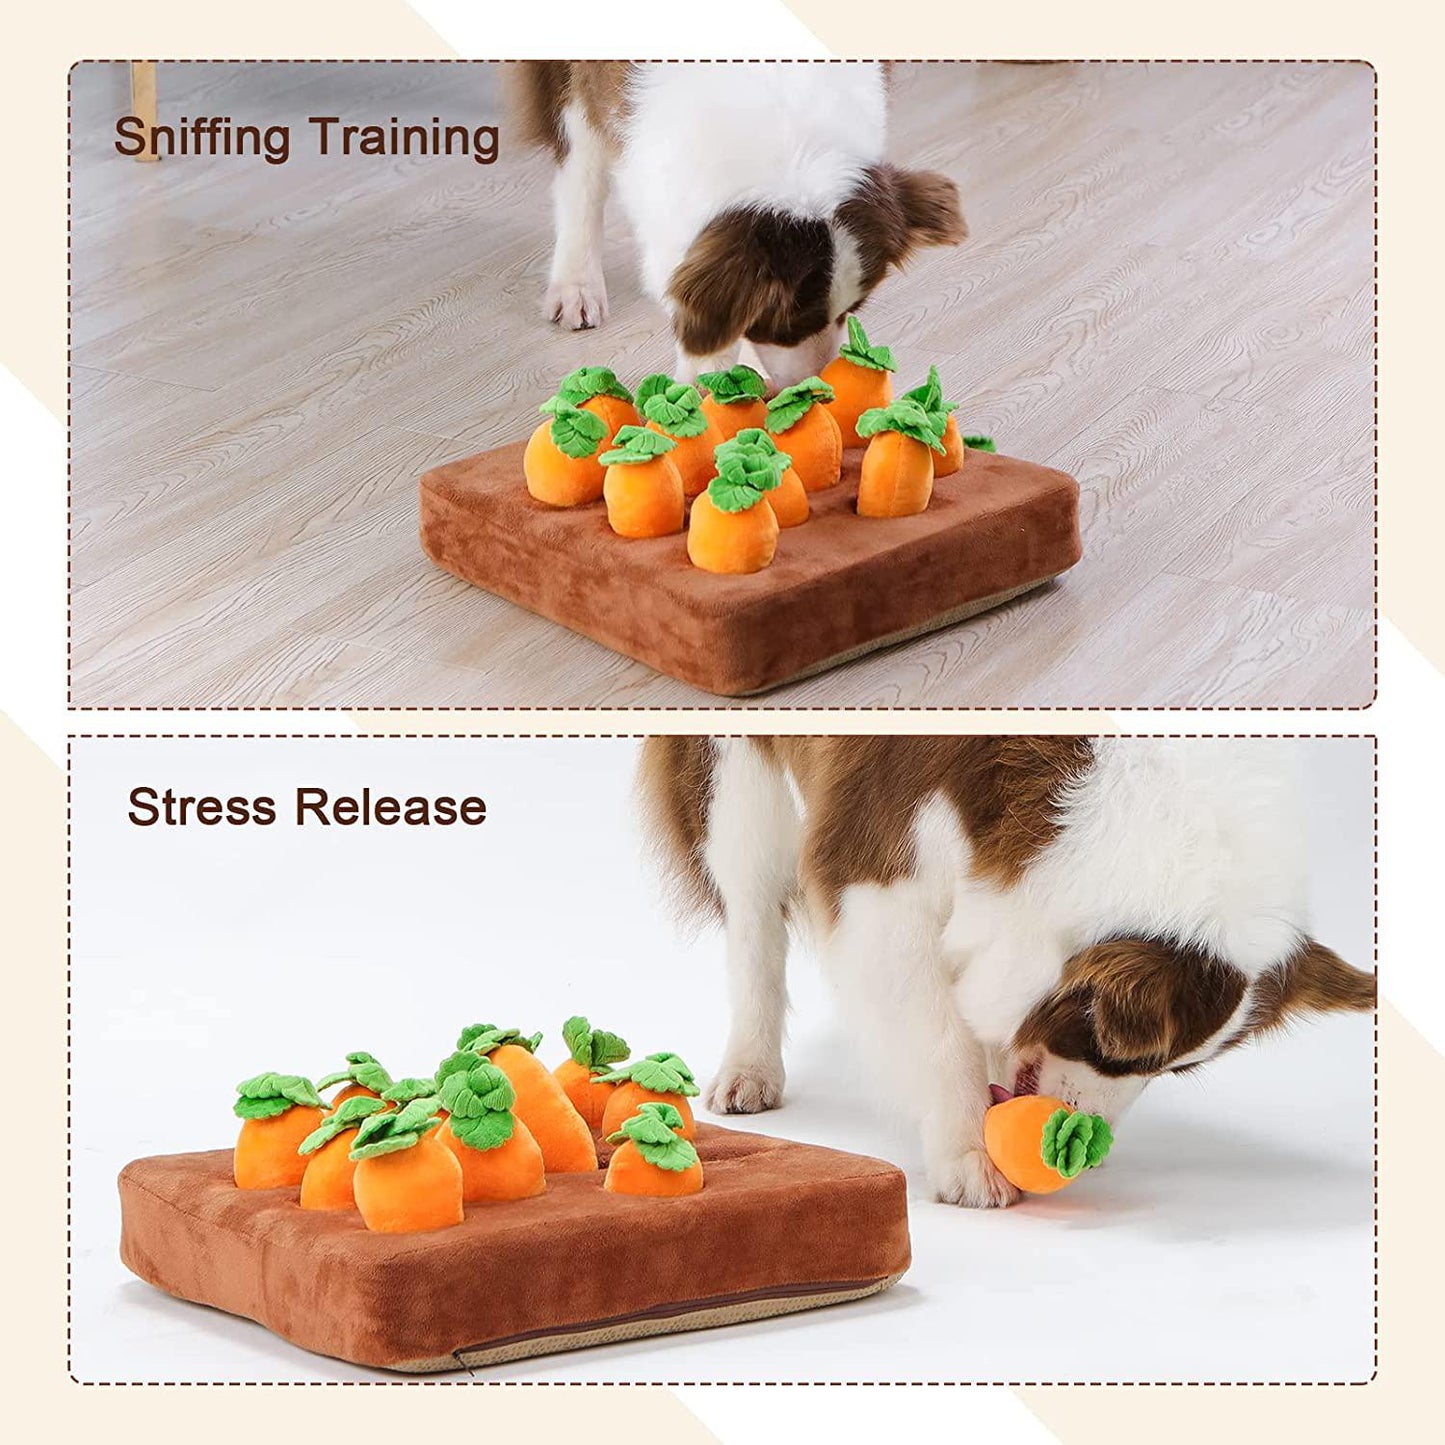 Interactive Dog Toys Carrot Snuffle Mat for Dogs Plush Puzzle Toys 2 in 1 Non-Slip Nosework Feed Games Pet Stress Relief with 12 Carrots